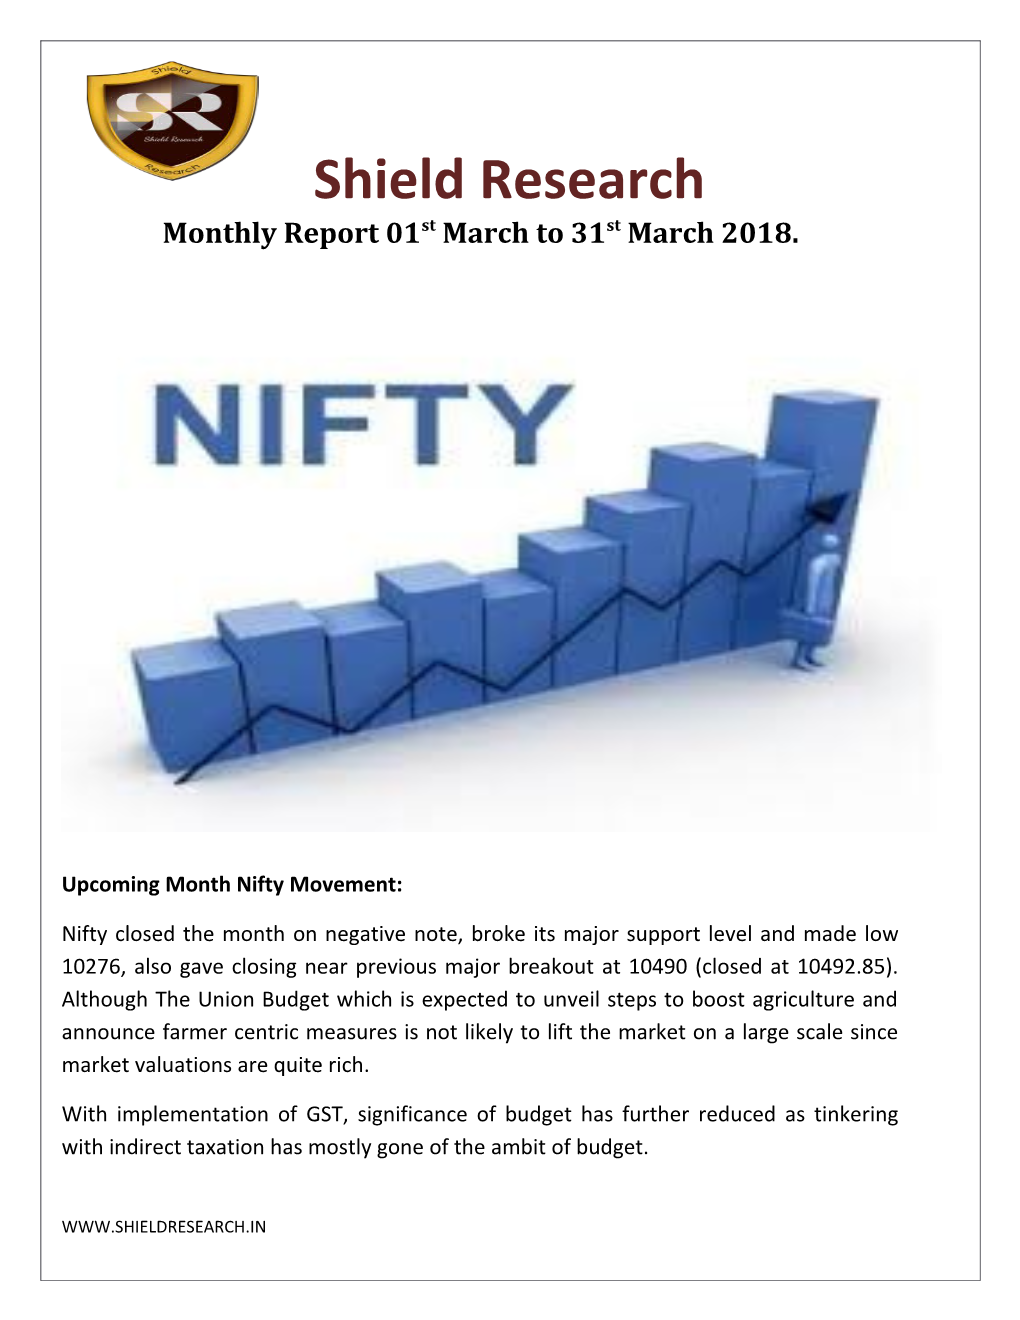 Upcoming Month Nifty Movement